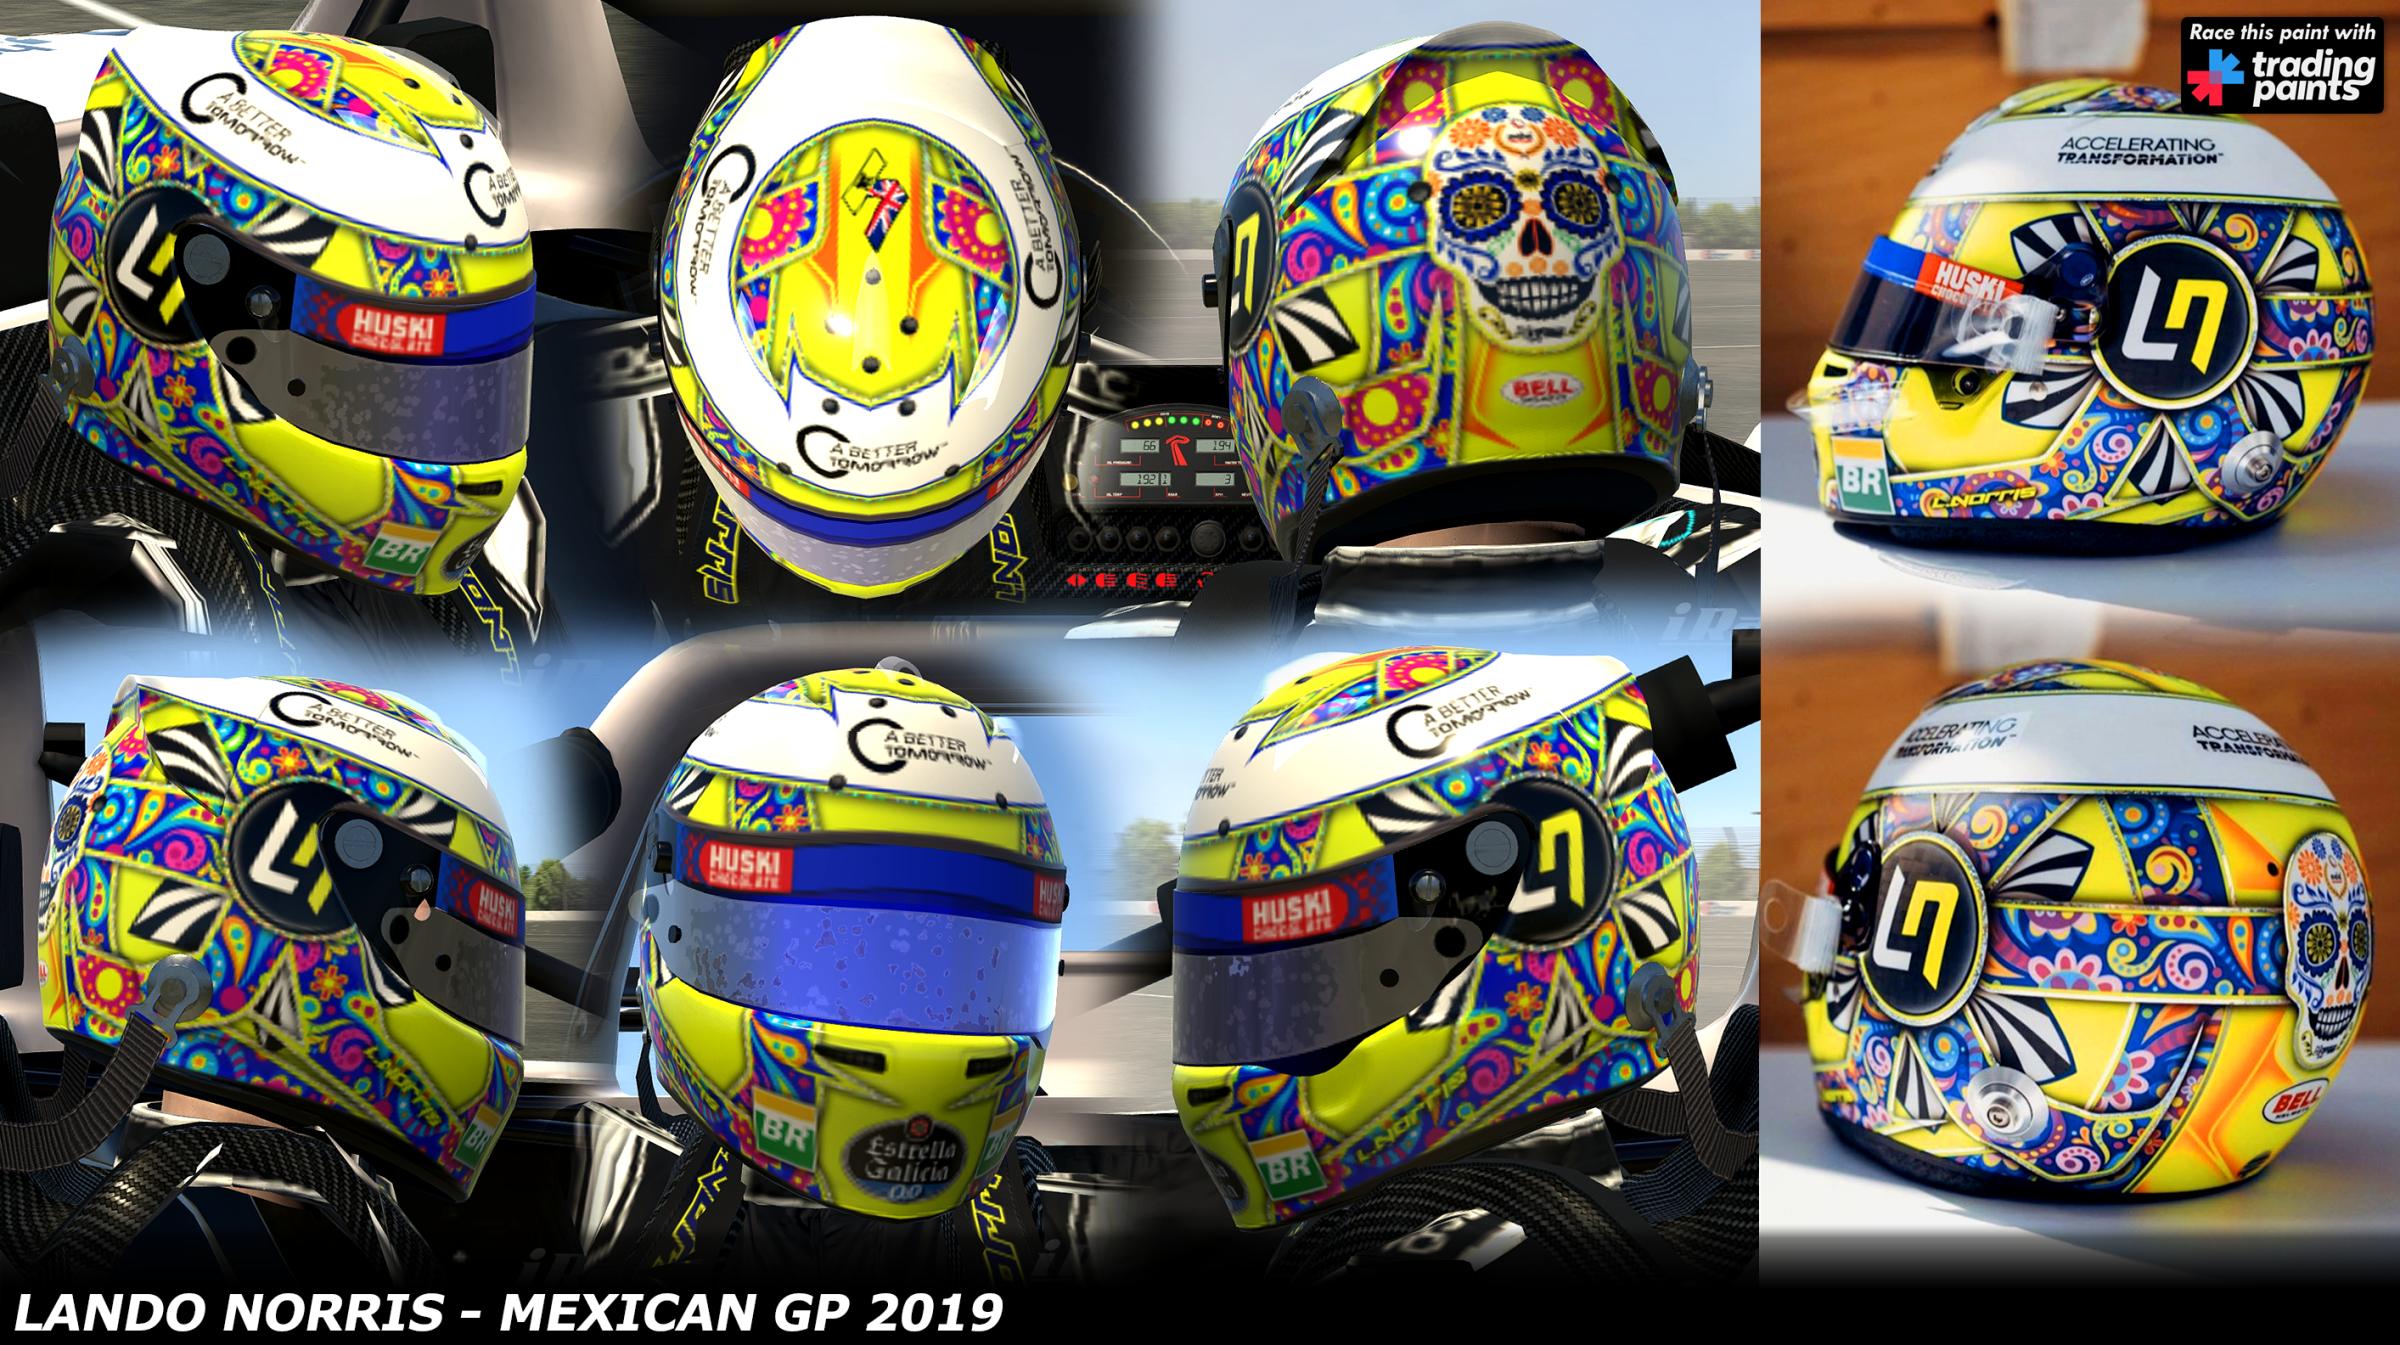 Preview of Lando Norris - Mexican GP 2019 by George Simmons